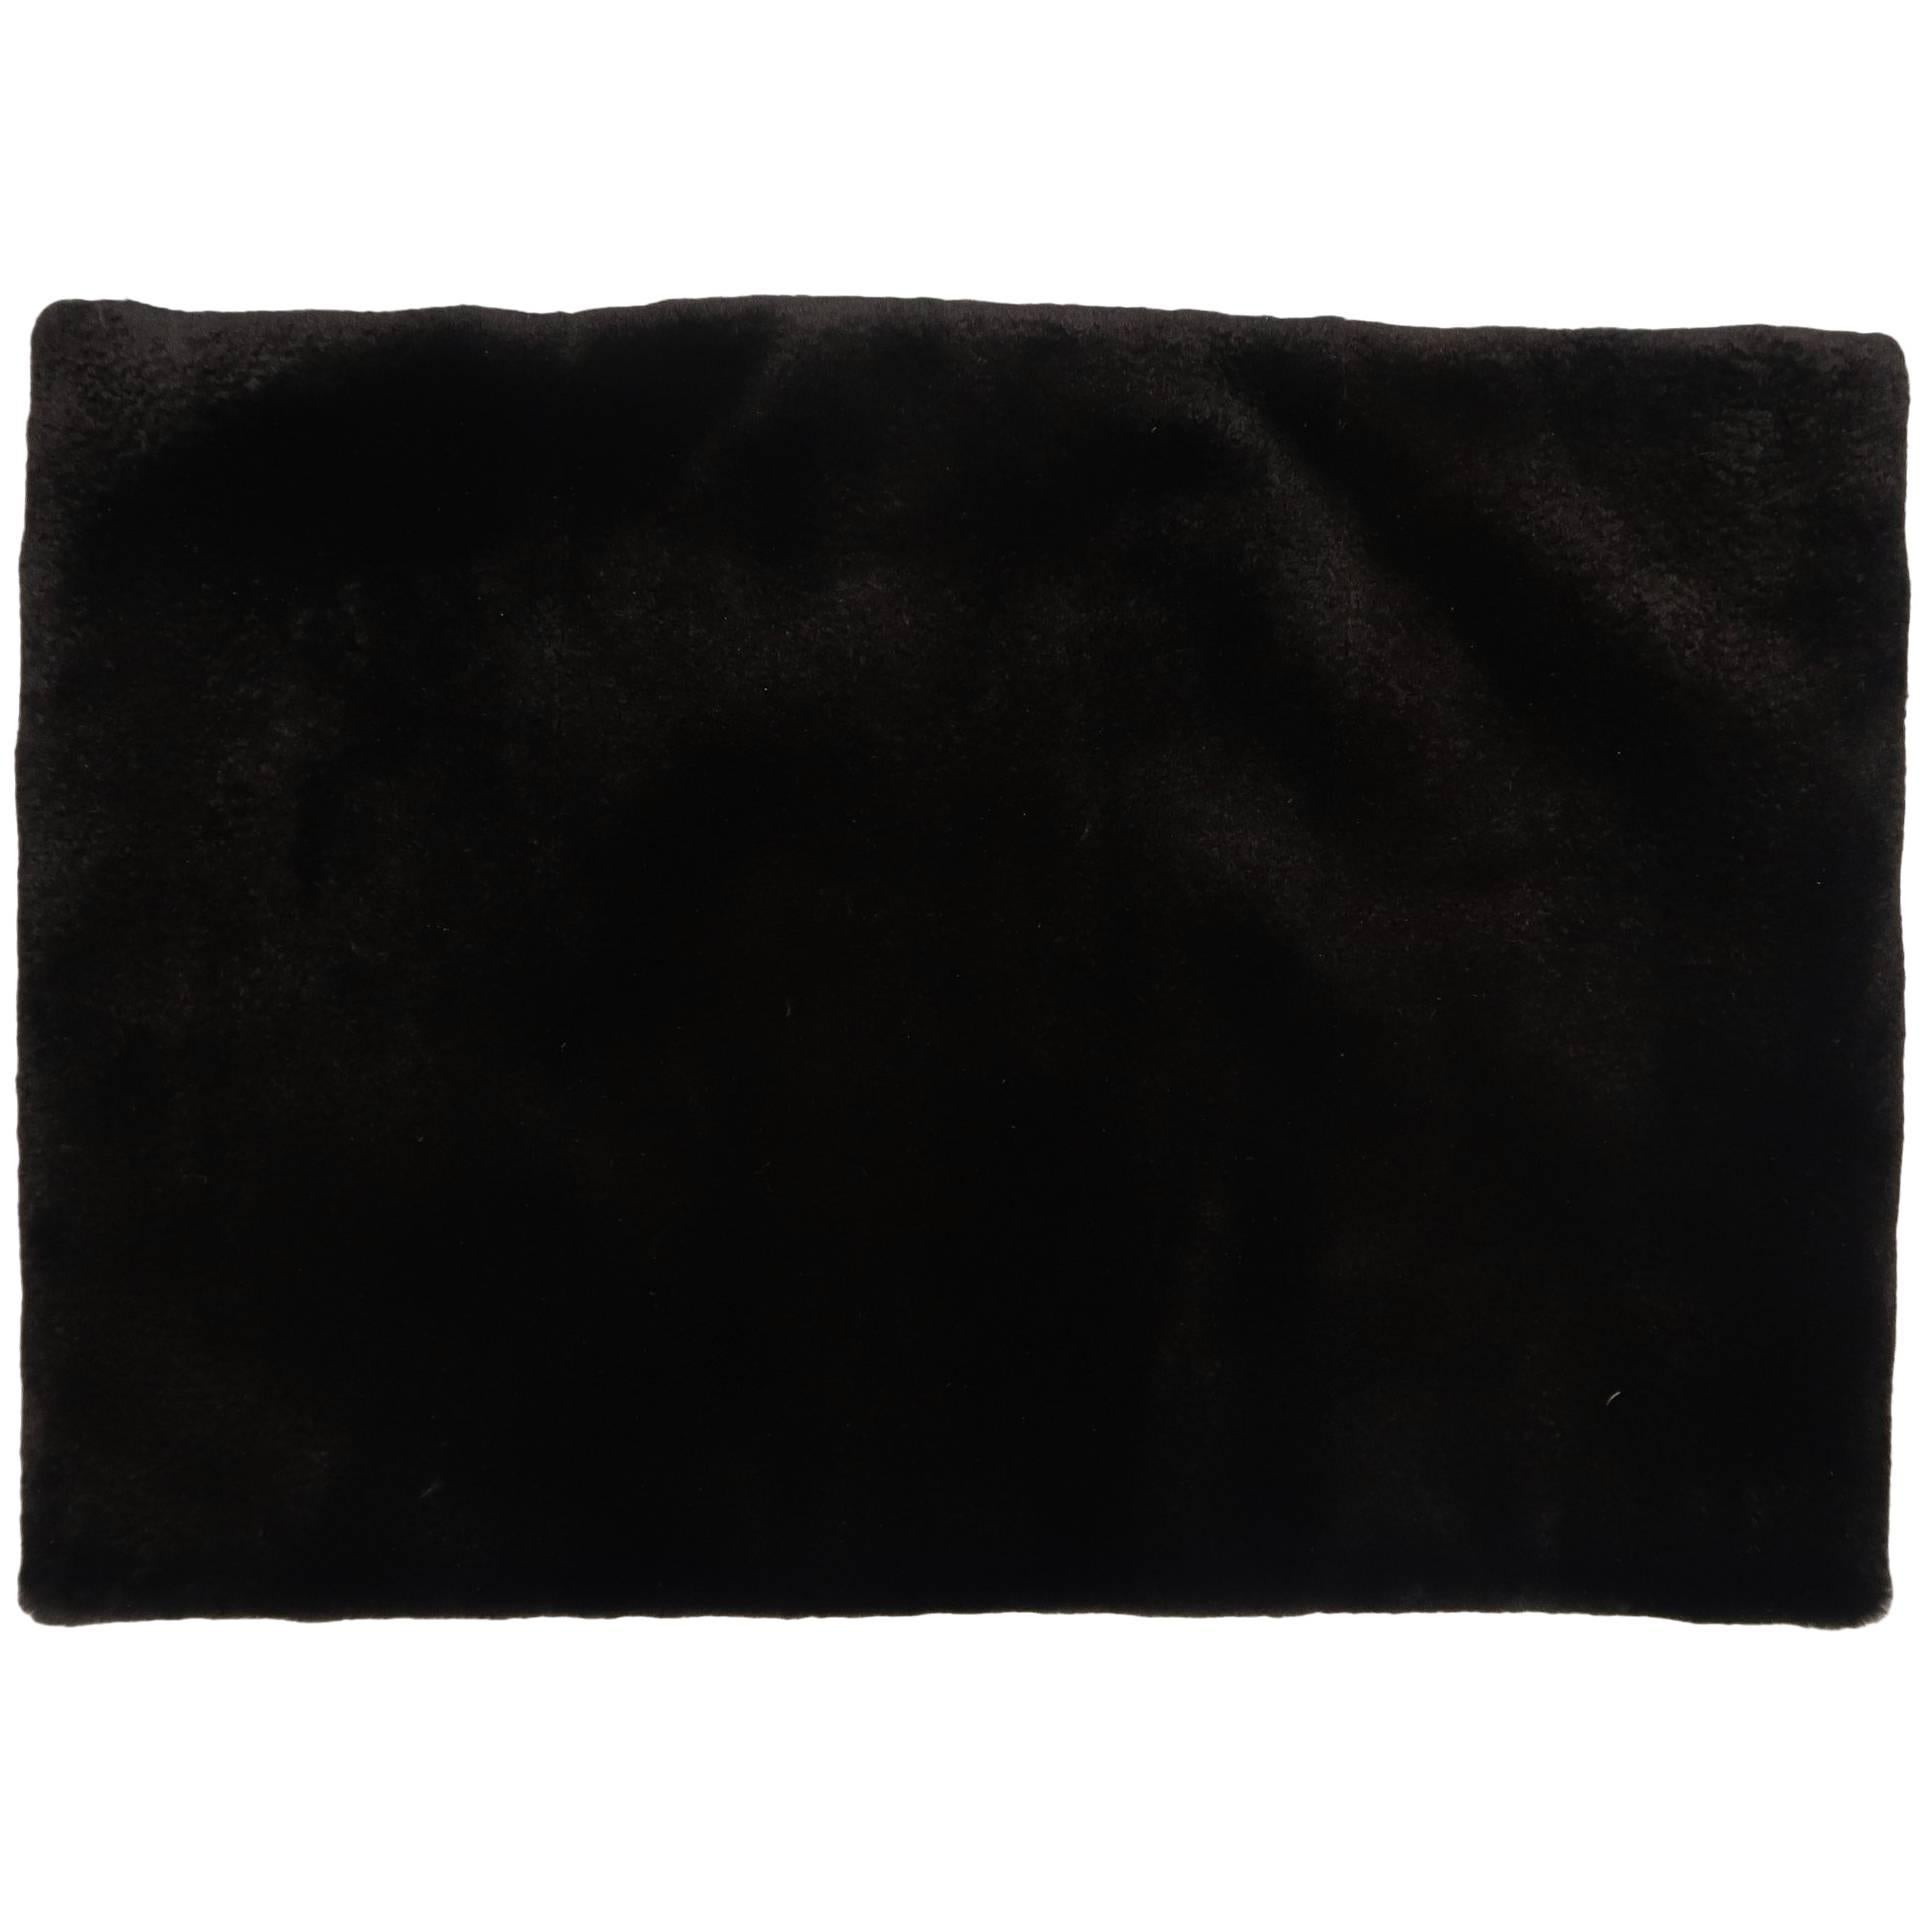 MARC JACOBS circle scarf comes in ultra soft black fur in a thick tube style. Made in France.
 
Excellent Pre-Owned Condition.
 
Length: 34 in.
Width: 11 in.

SKU: 87269